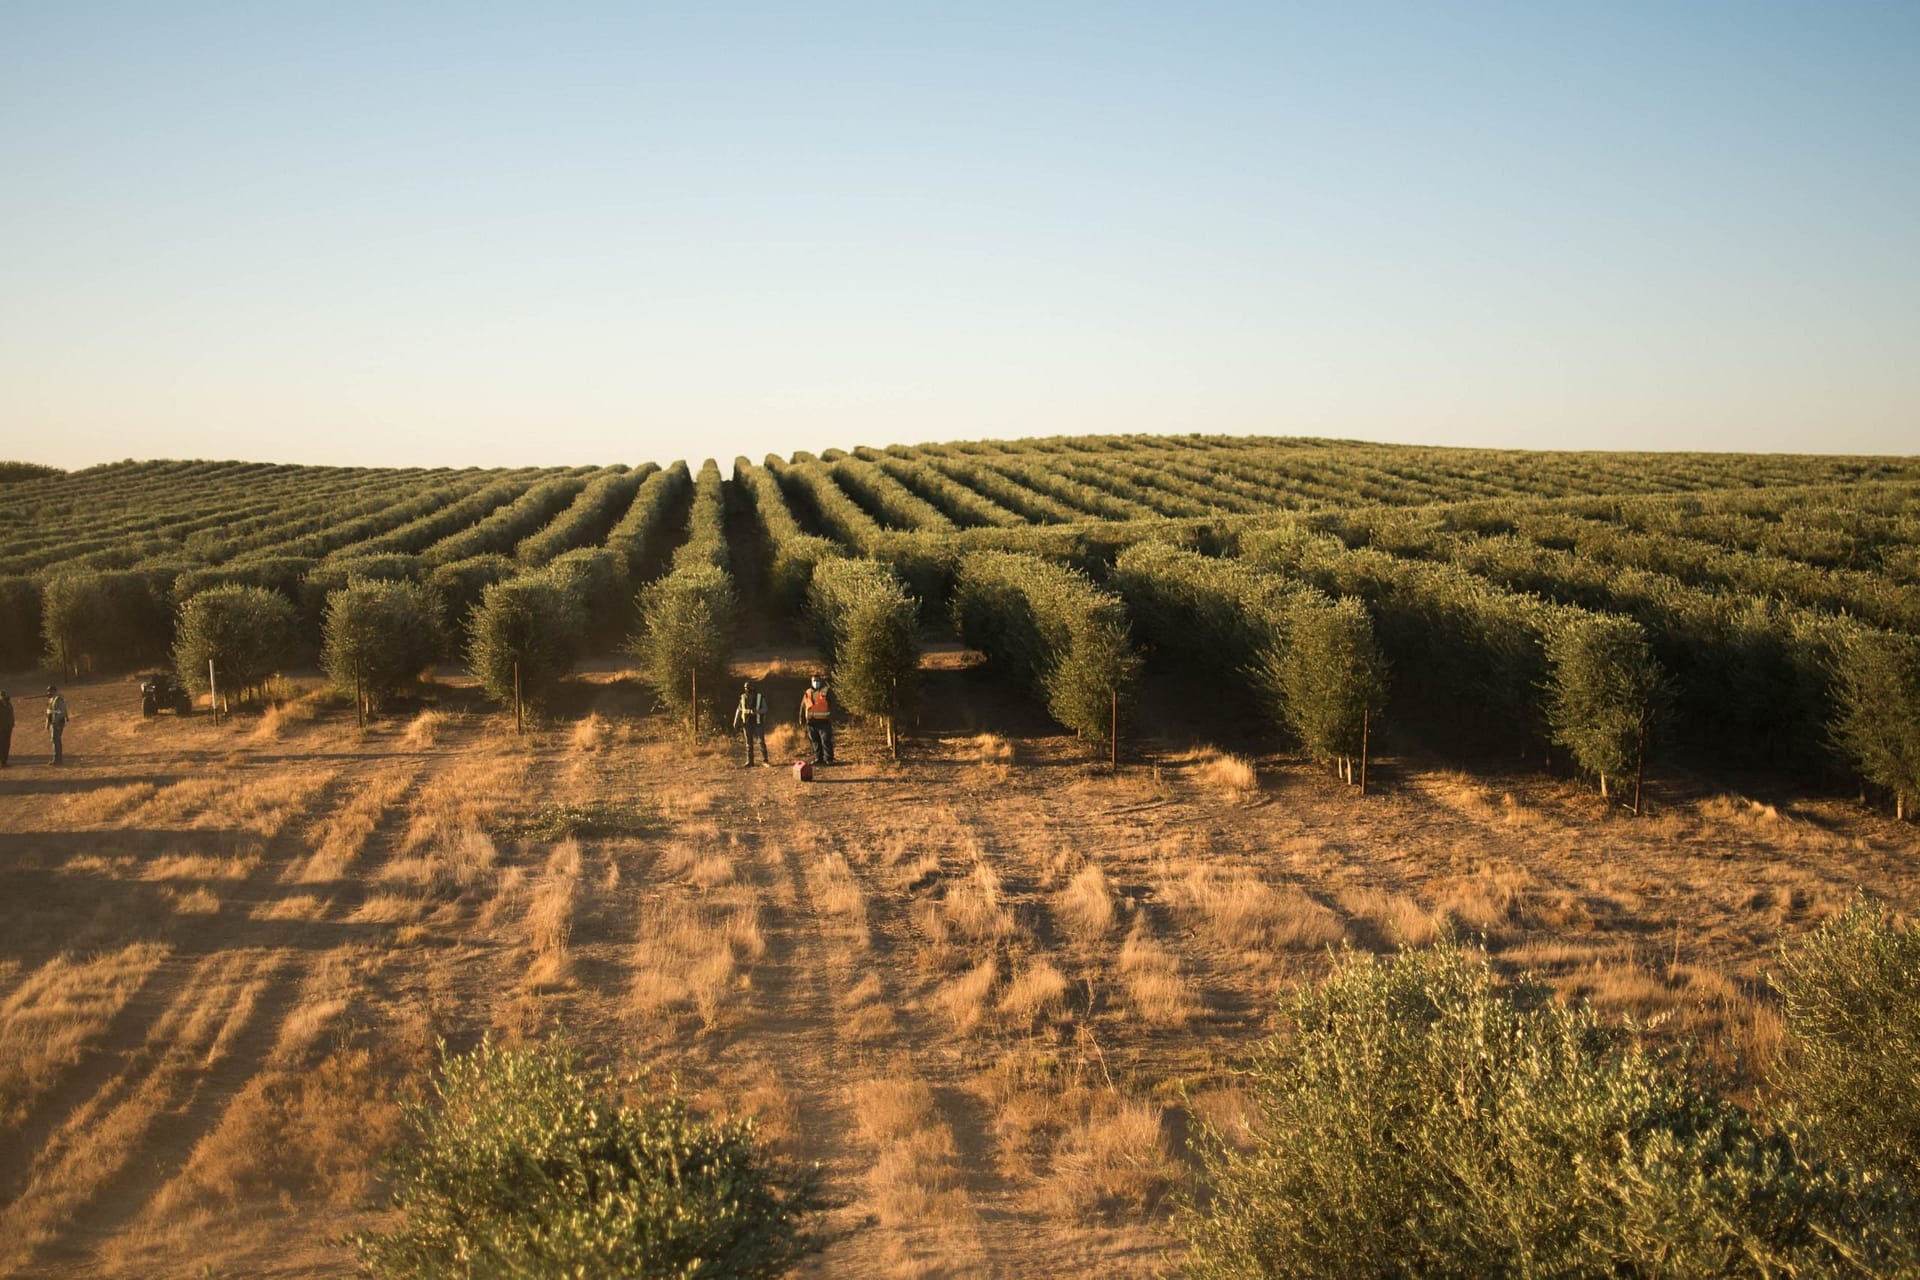 north-america-the-best-olive-oils-competitions-production-californians-navigate-a-challenging-harvest-with-unwavering-commitment-to-quality-olive-oil-times